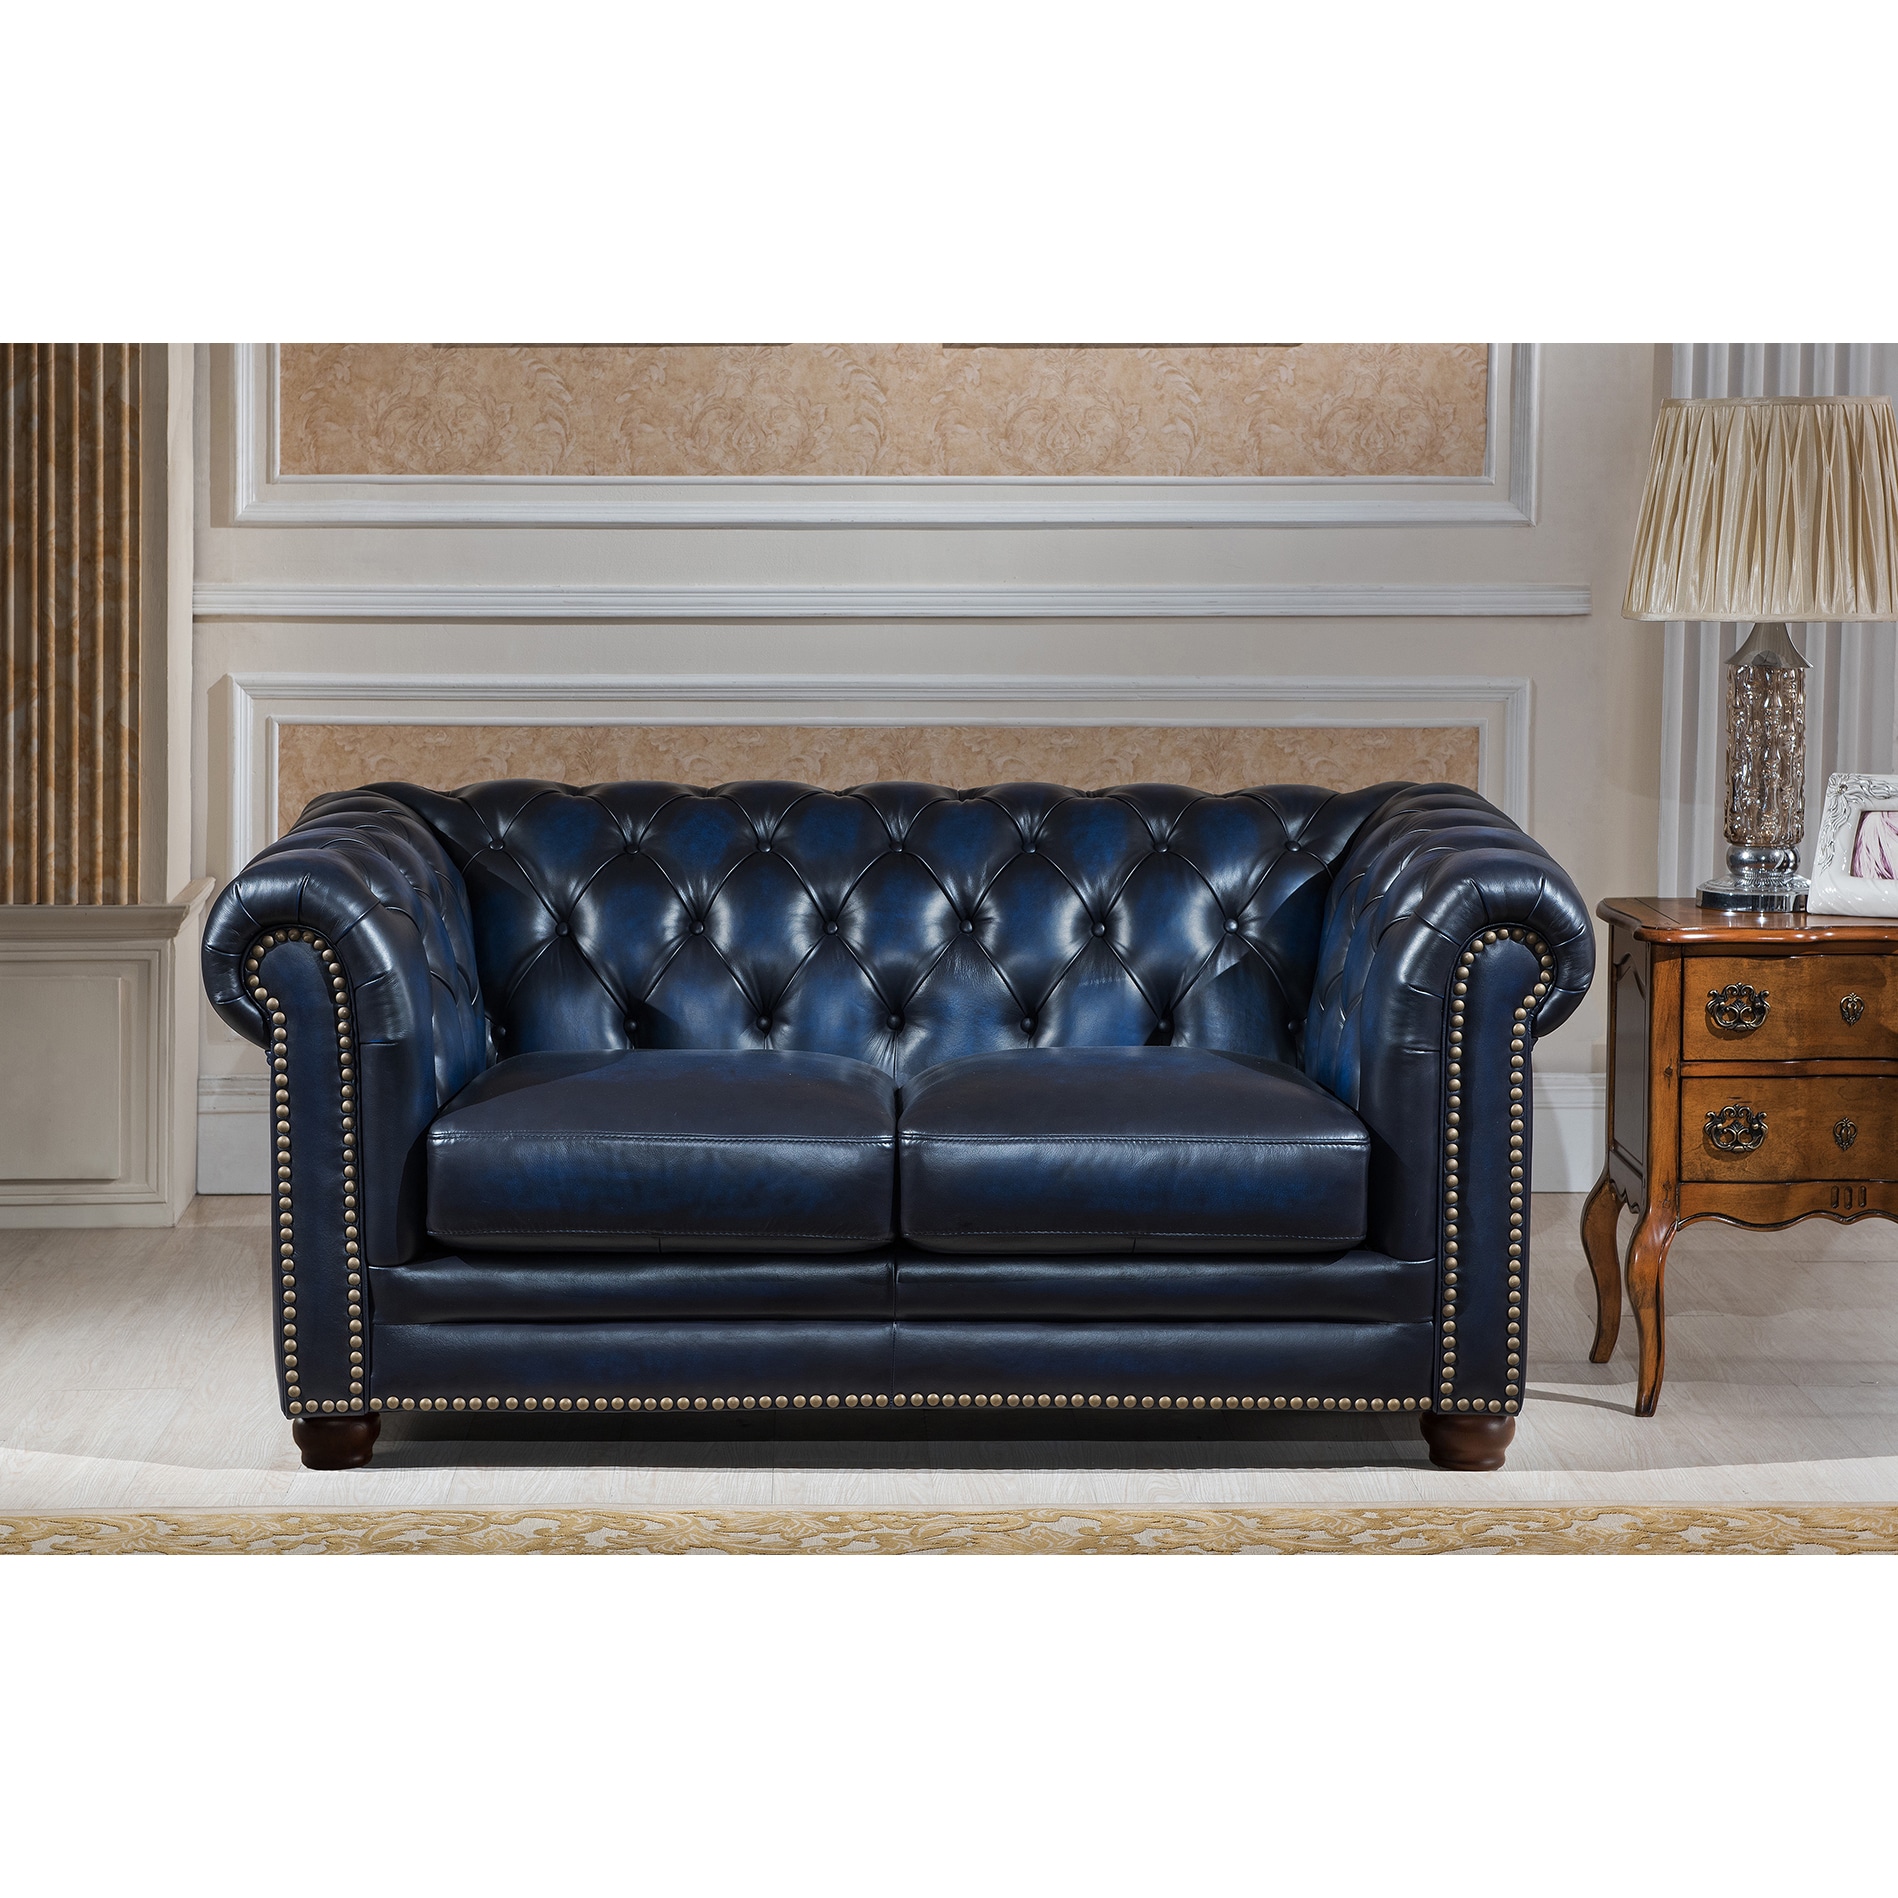 Blue Chesterfield Leather Sofa Antique Blue Chesterfield